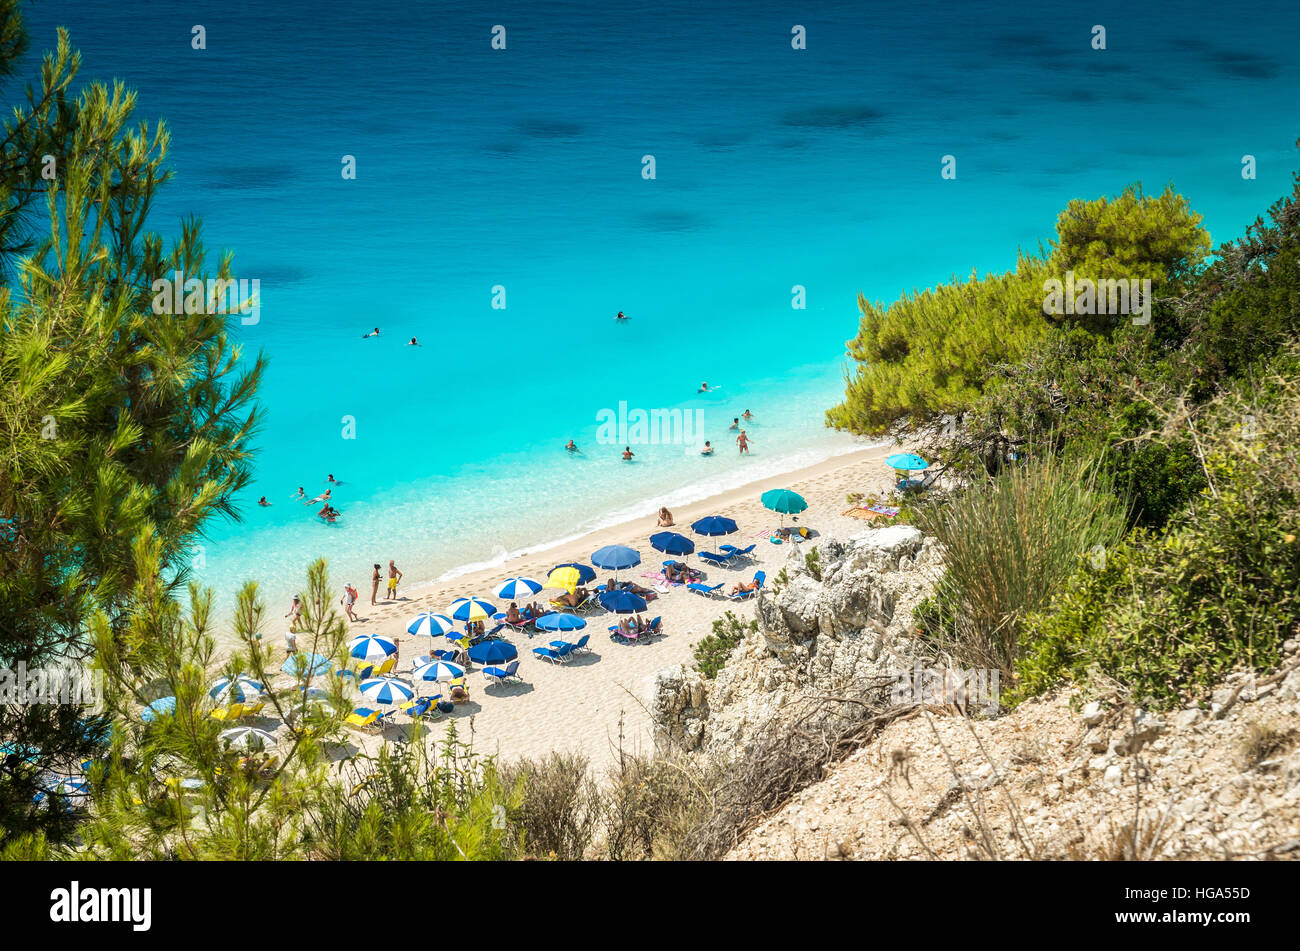 Egremni beach, Lefkada island, Greece. Large and long beach with turquoise water on the island of Lefkada in Greece Stock Photo